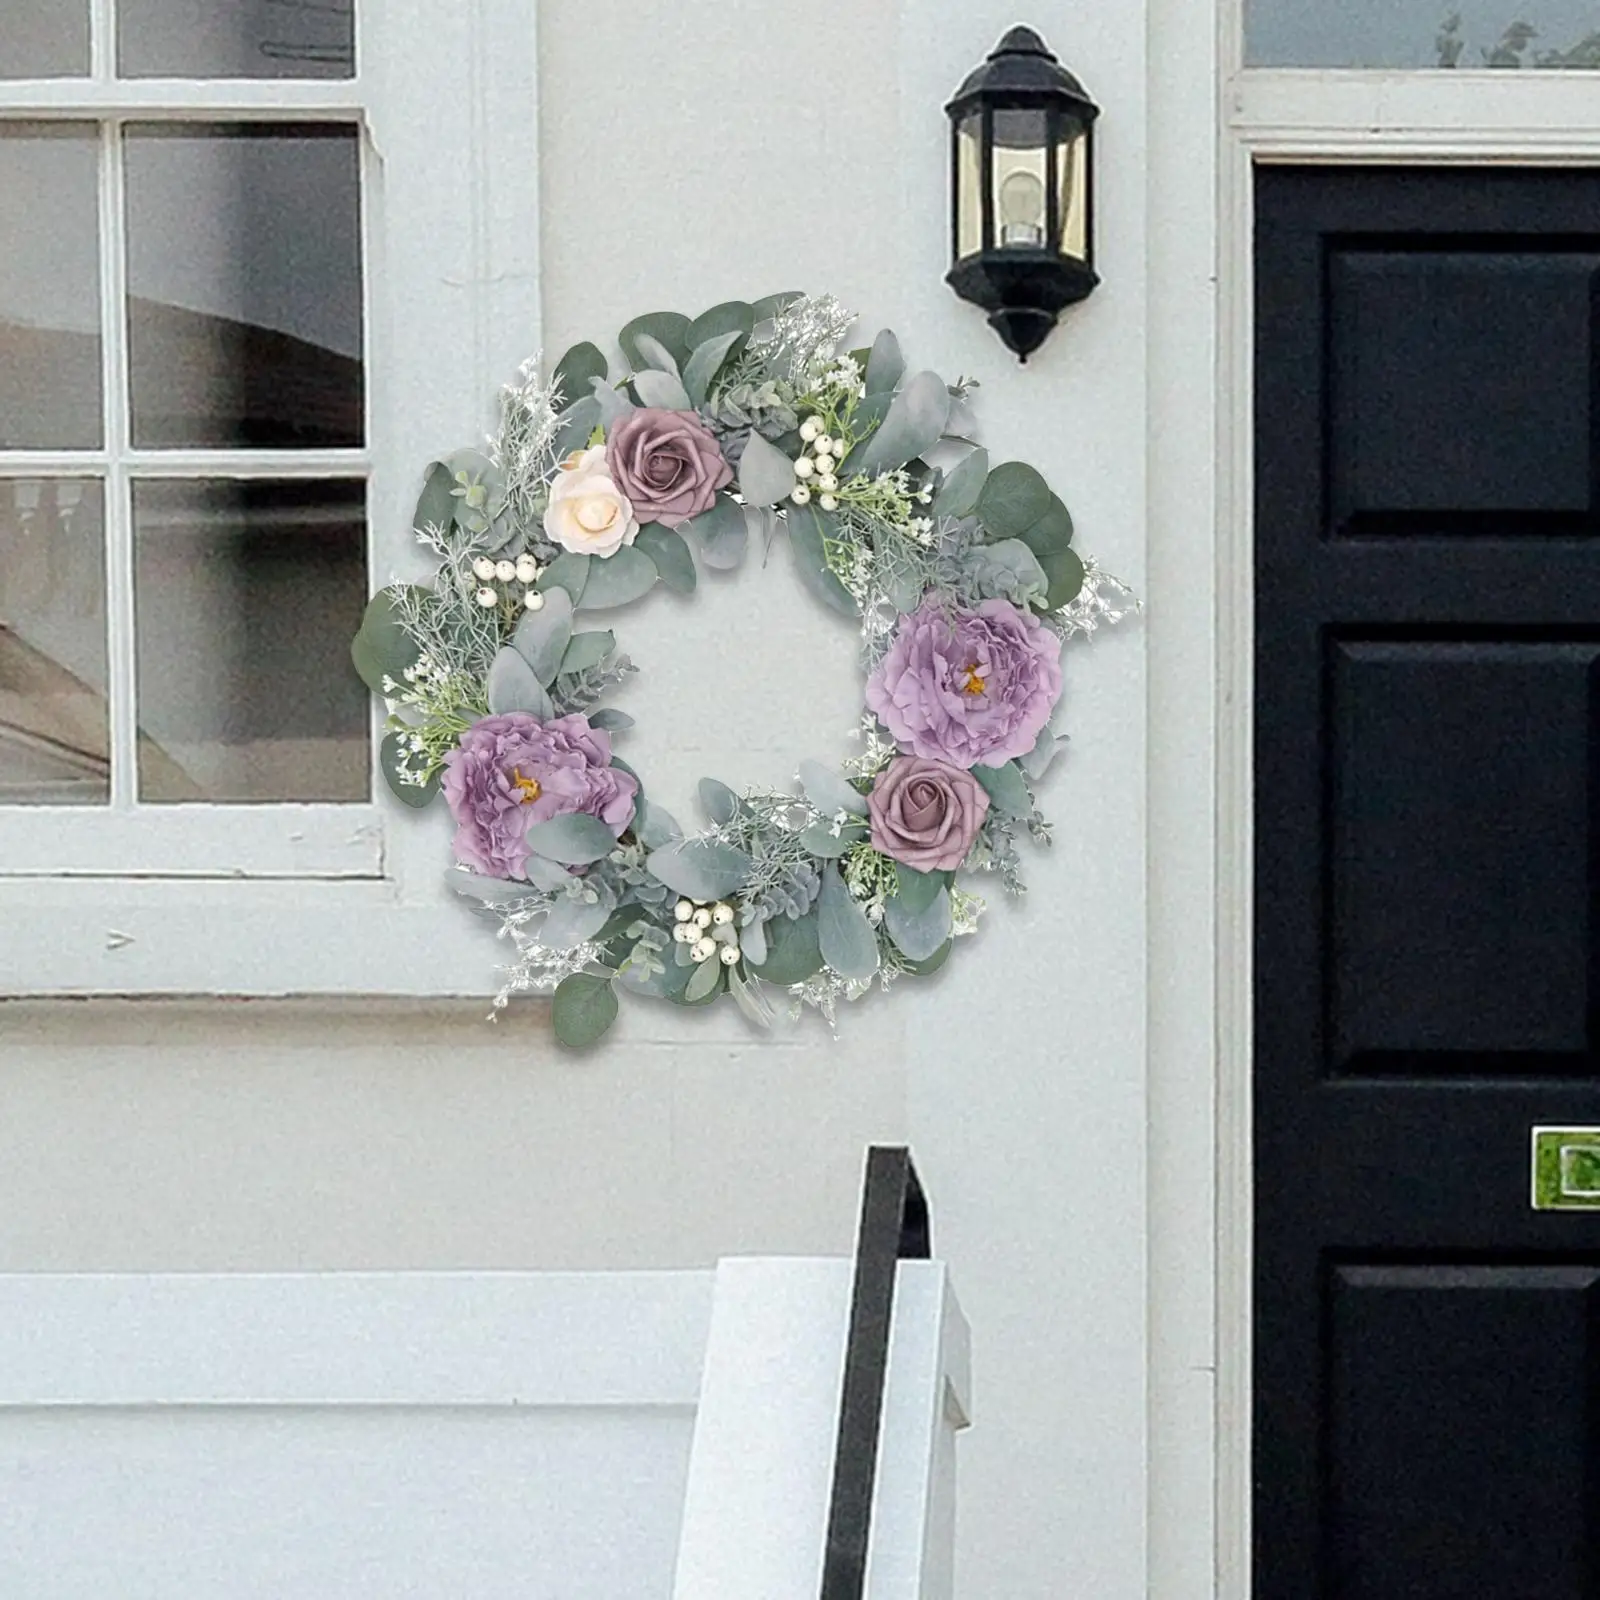 18inch Peony Wreath Valentines Wreath Greenery Leaves for Front decor Door Office Garden